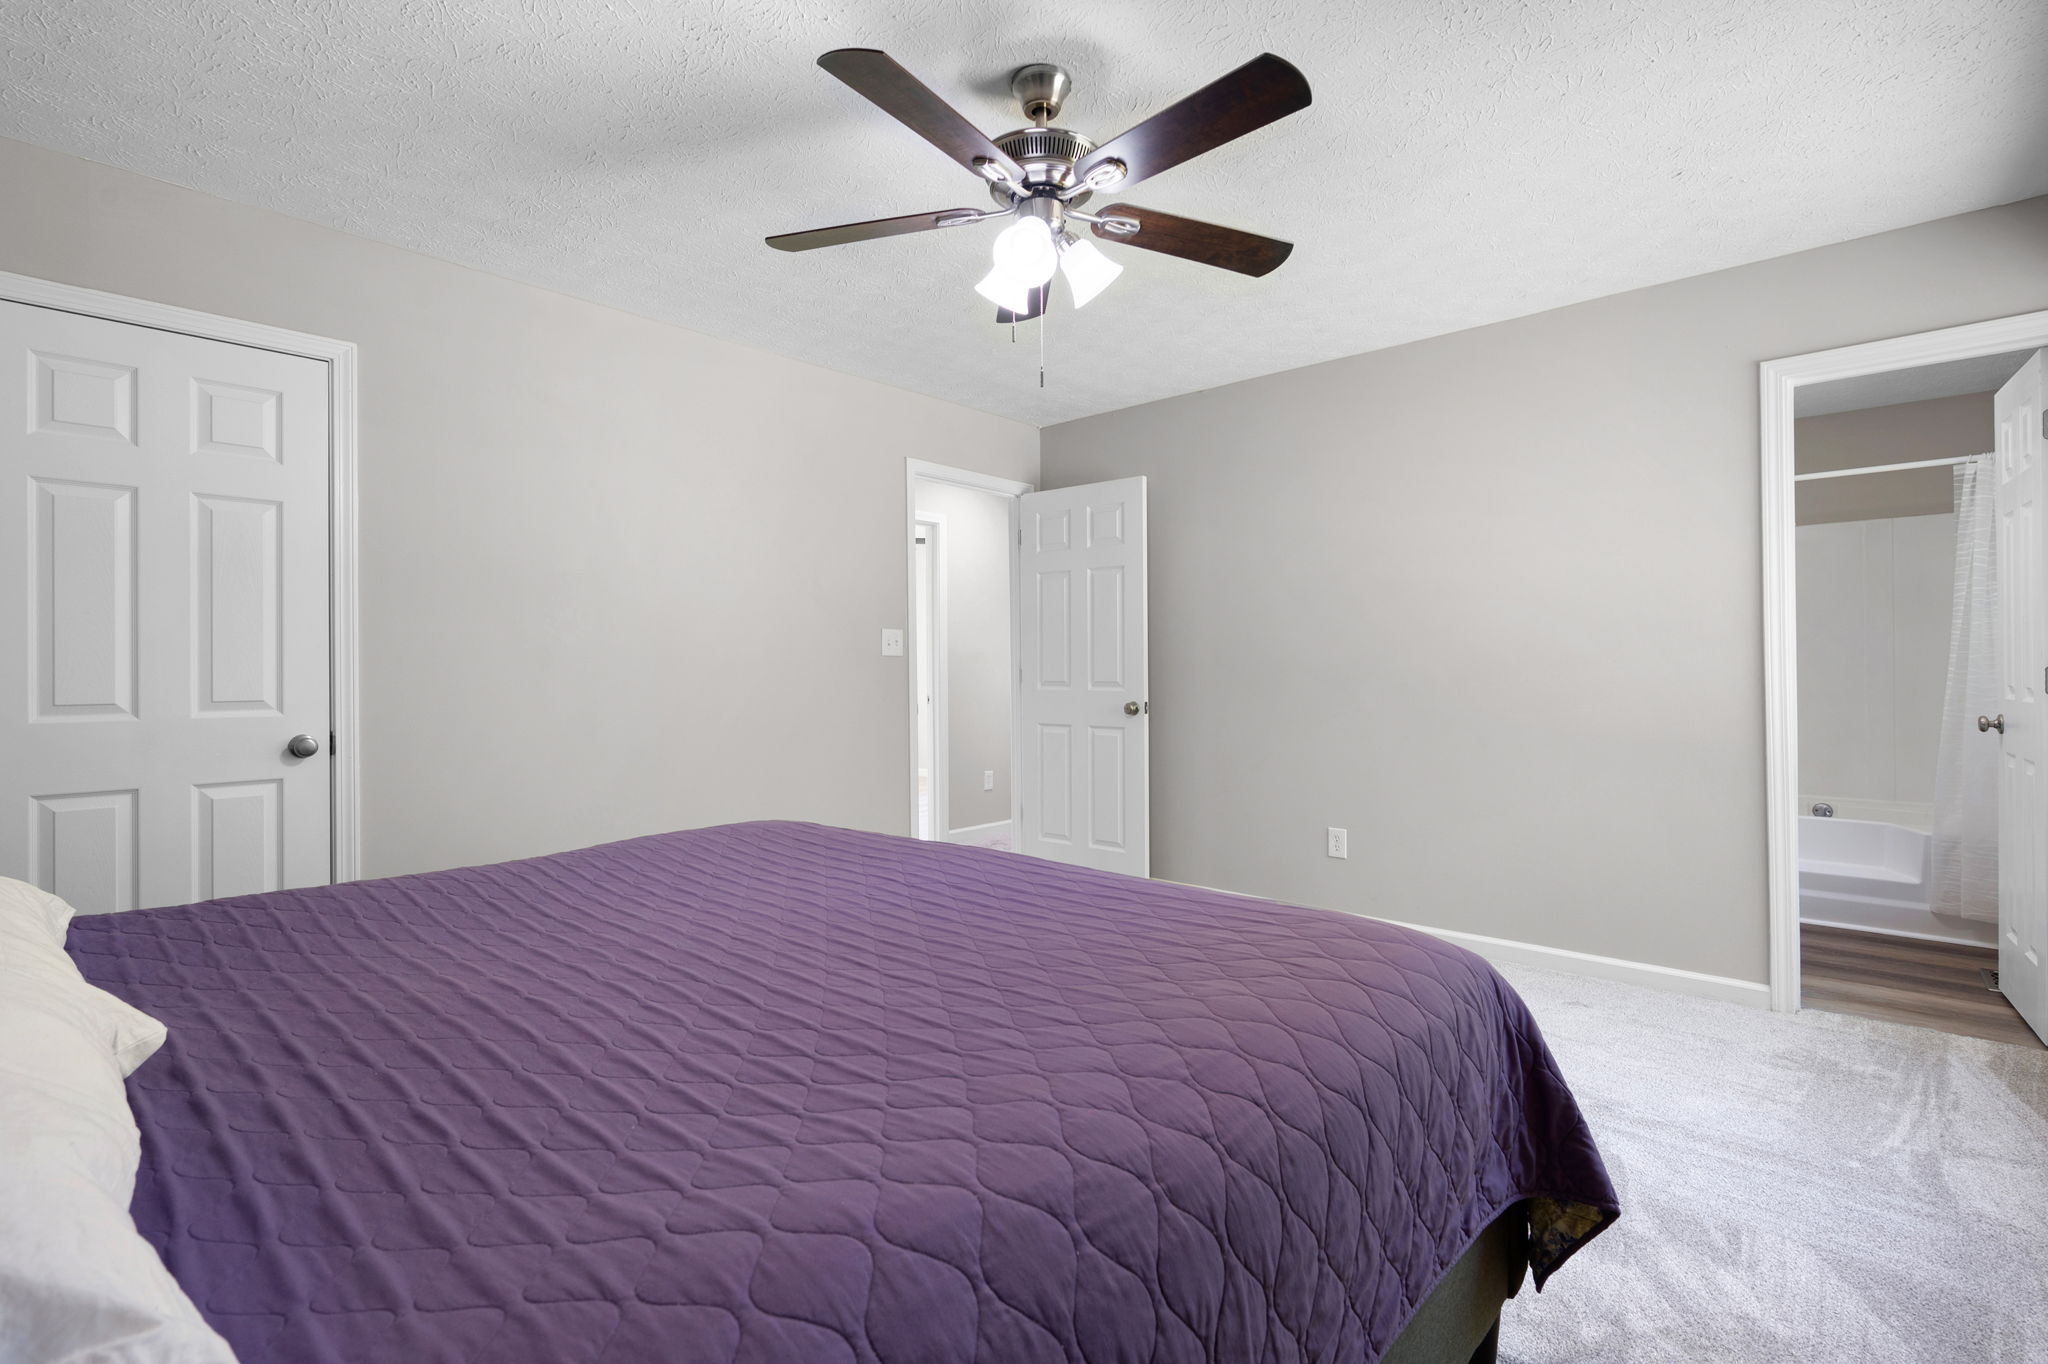 The primary suite features new paint, new carpet and a new ceiling fan.